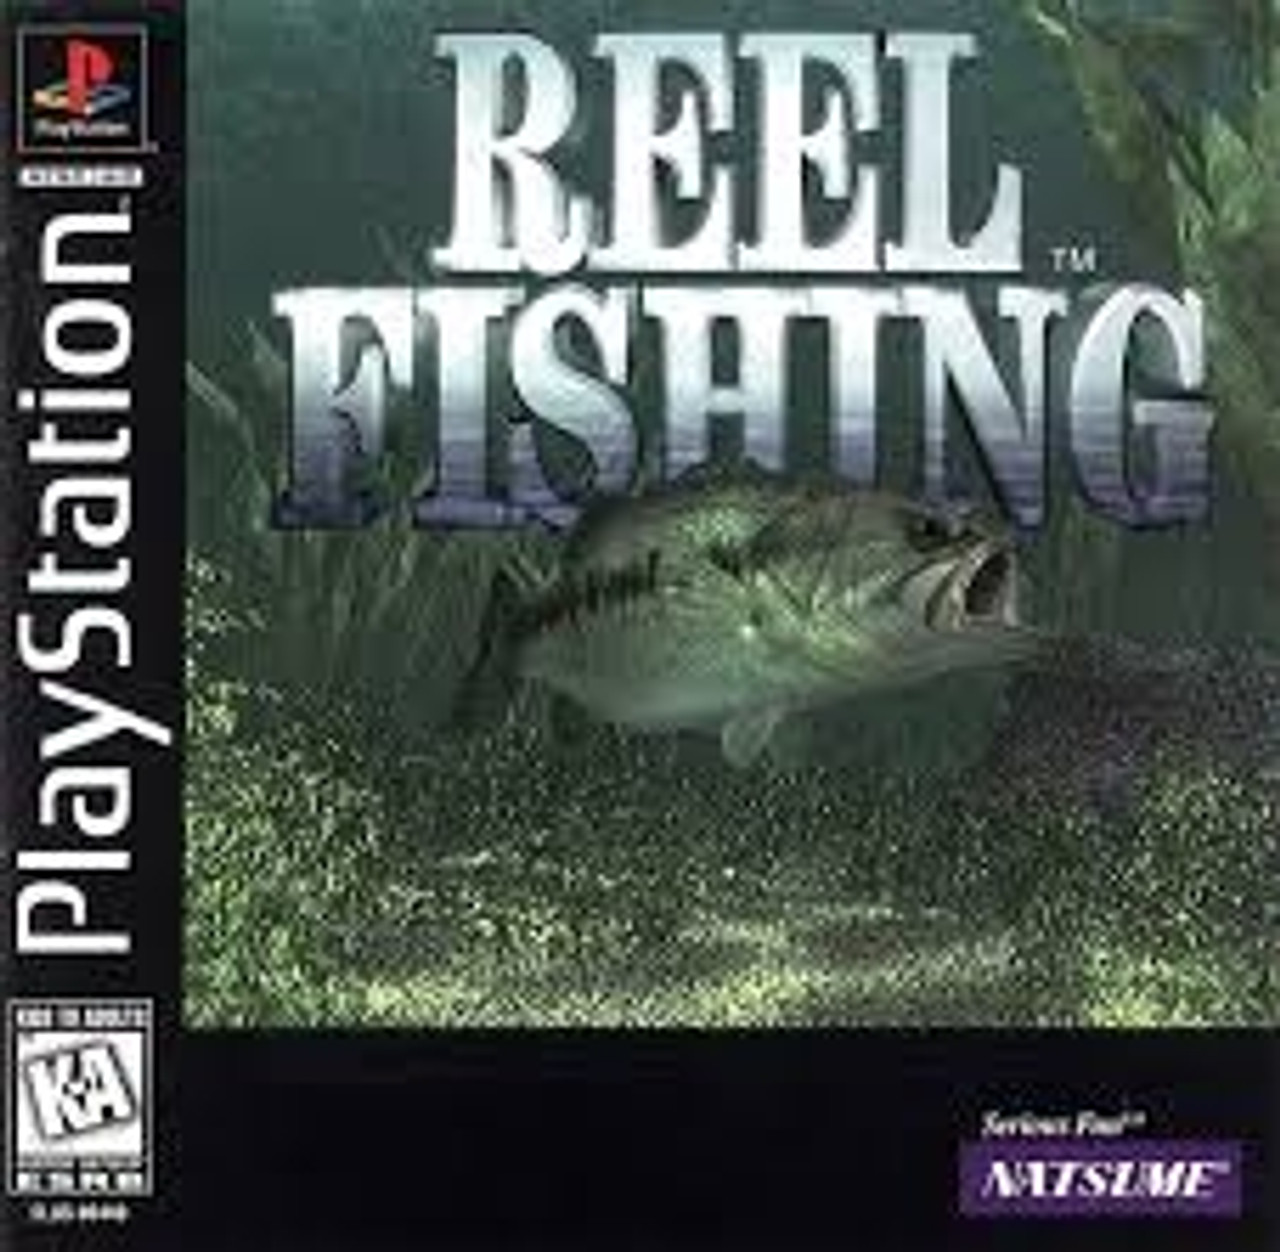 REEL FISHING, PS1 PlayStation, Natsume, RARE COMPLETE